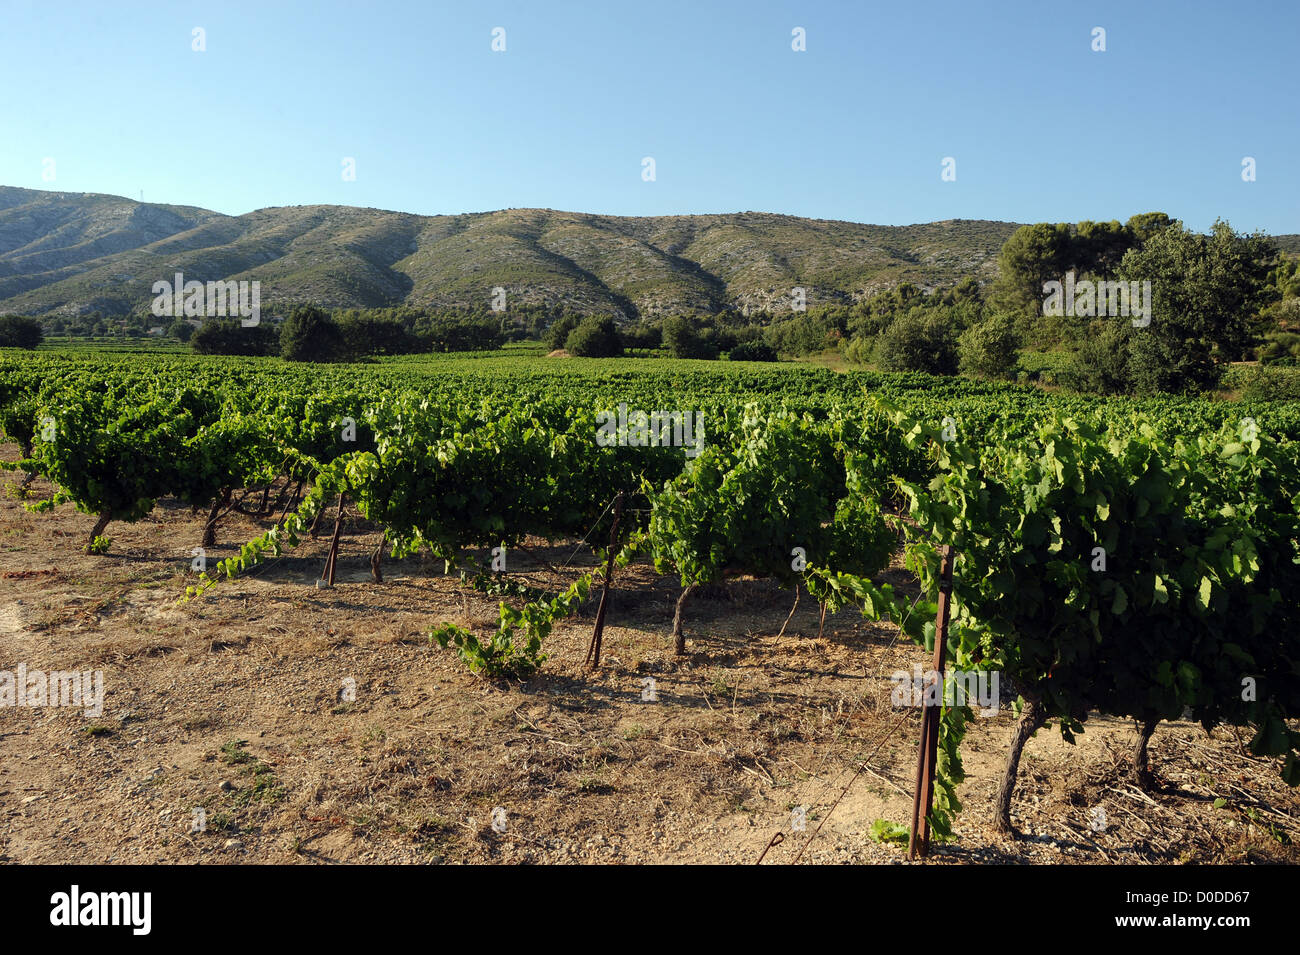 Vineyards belonging to the veterans and injured soldiers from France's Foreign Legion in Puyloubier, Provence, Southern France. Stock Photo